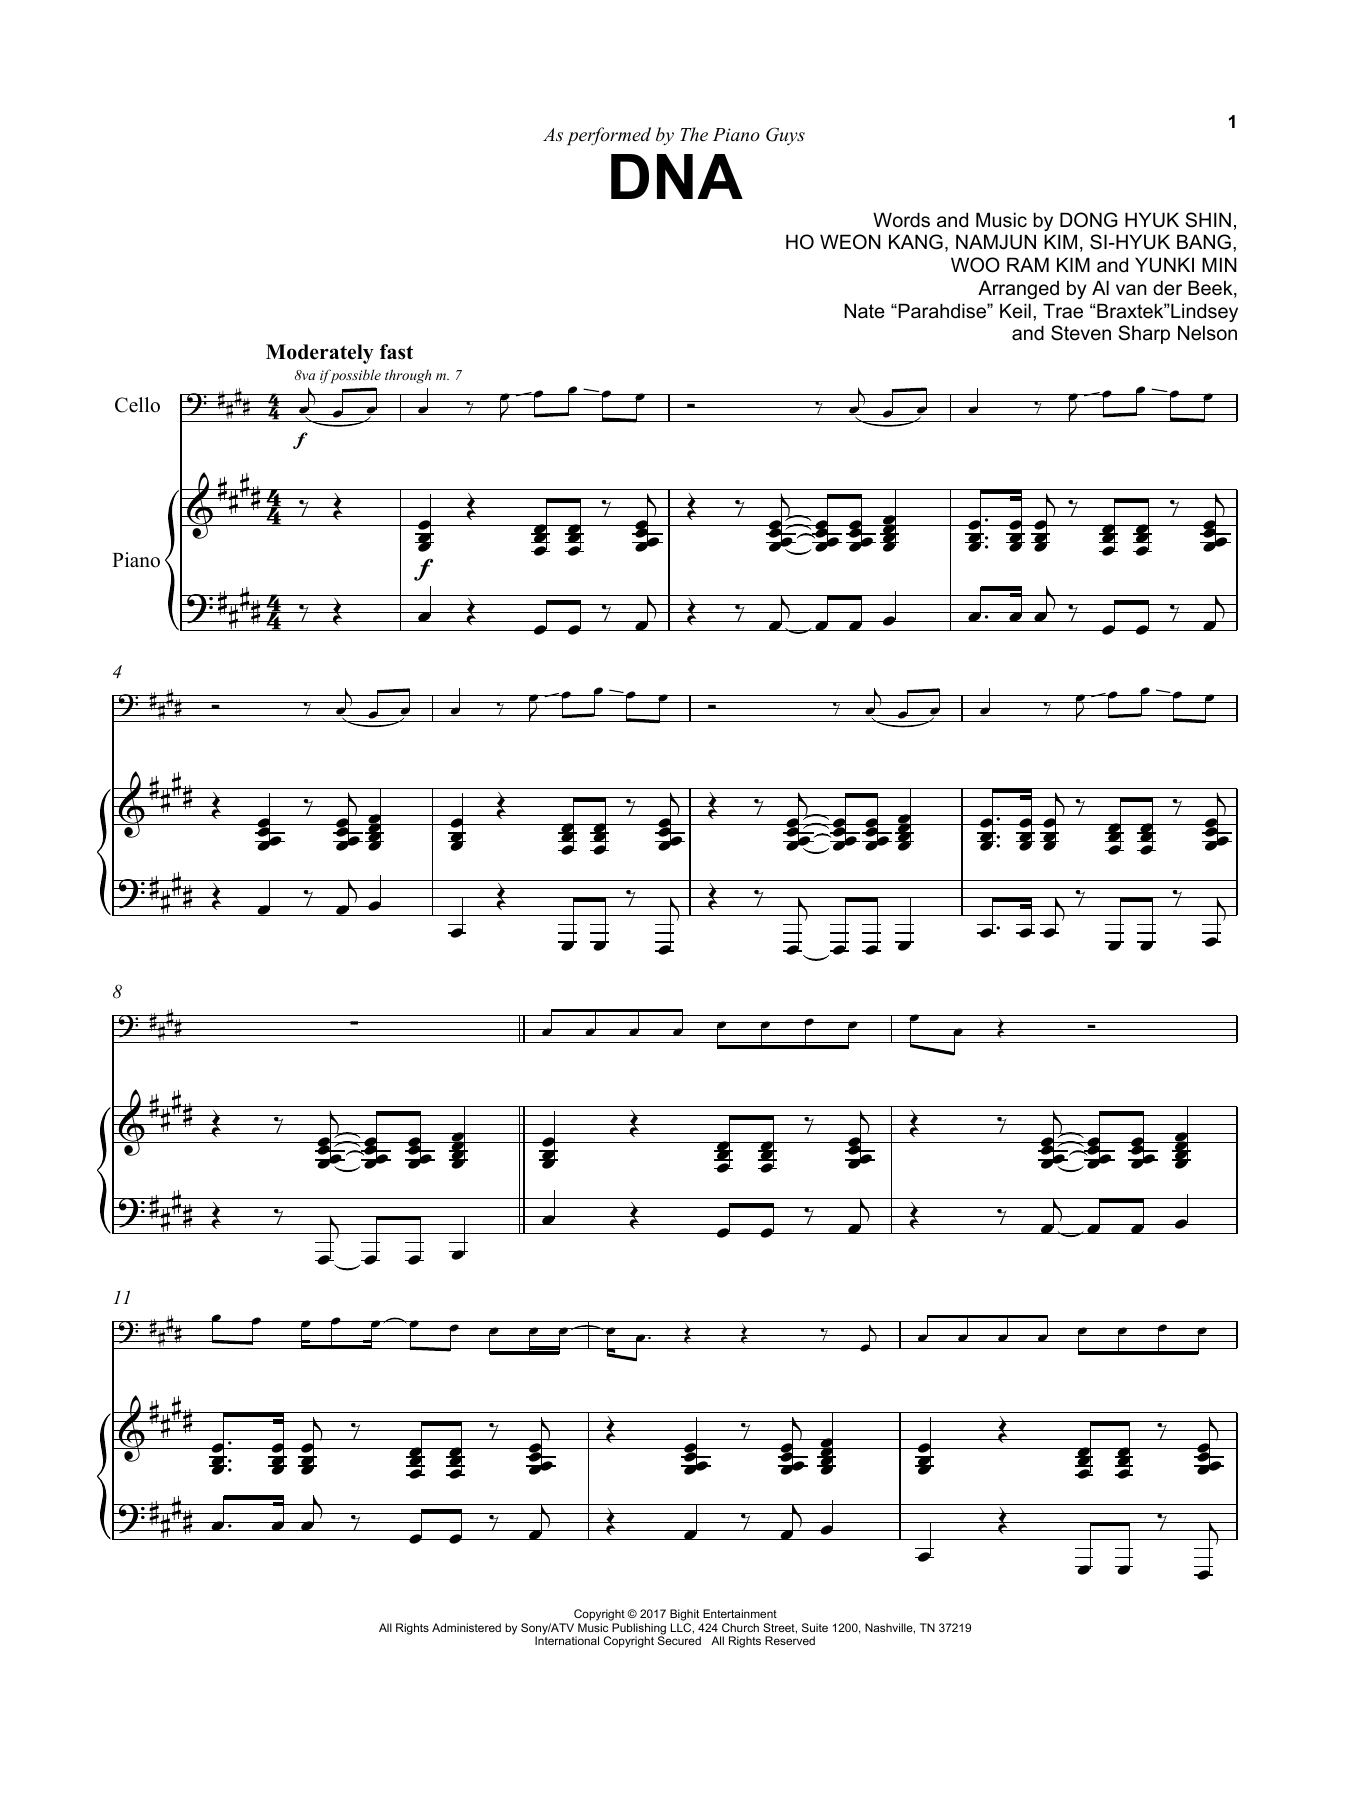 Download The Piano Guys DNA Sheet Music